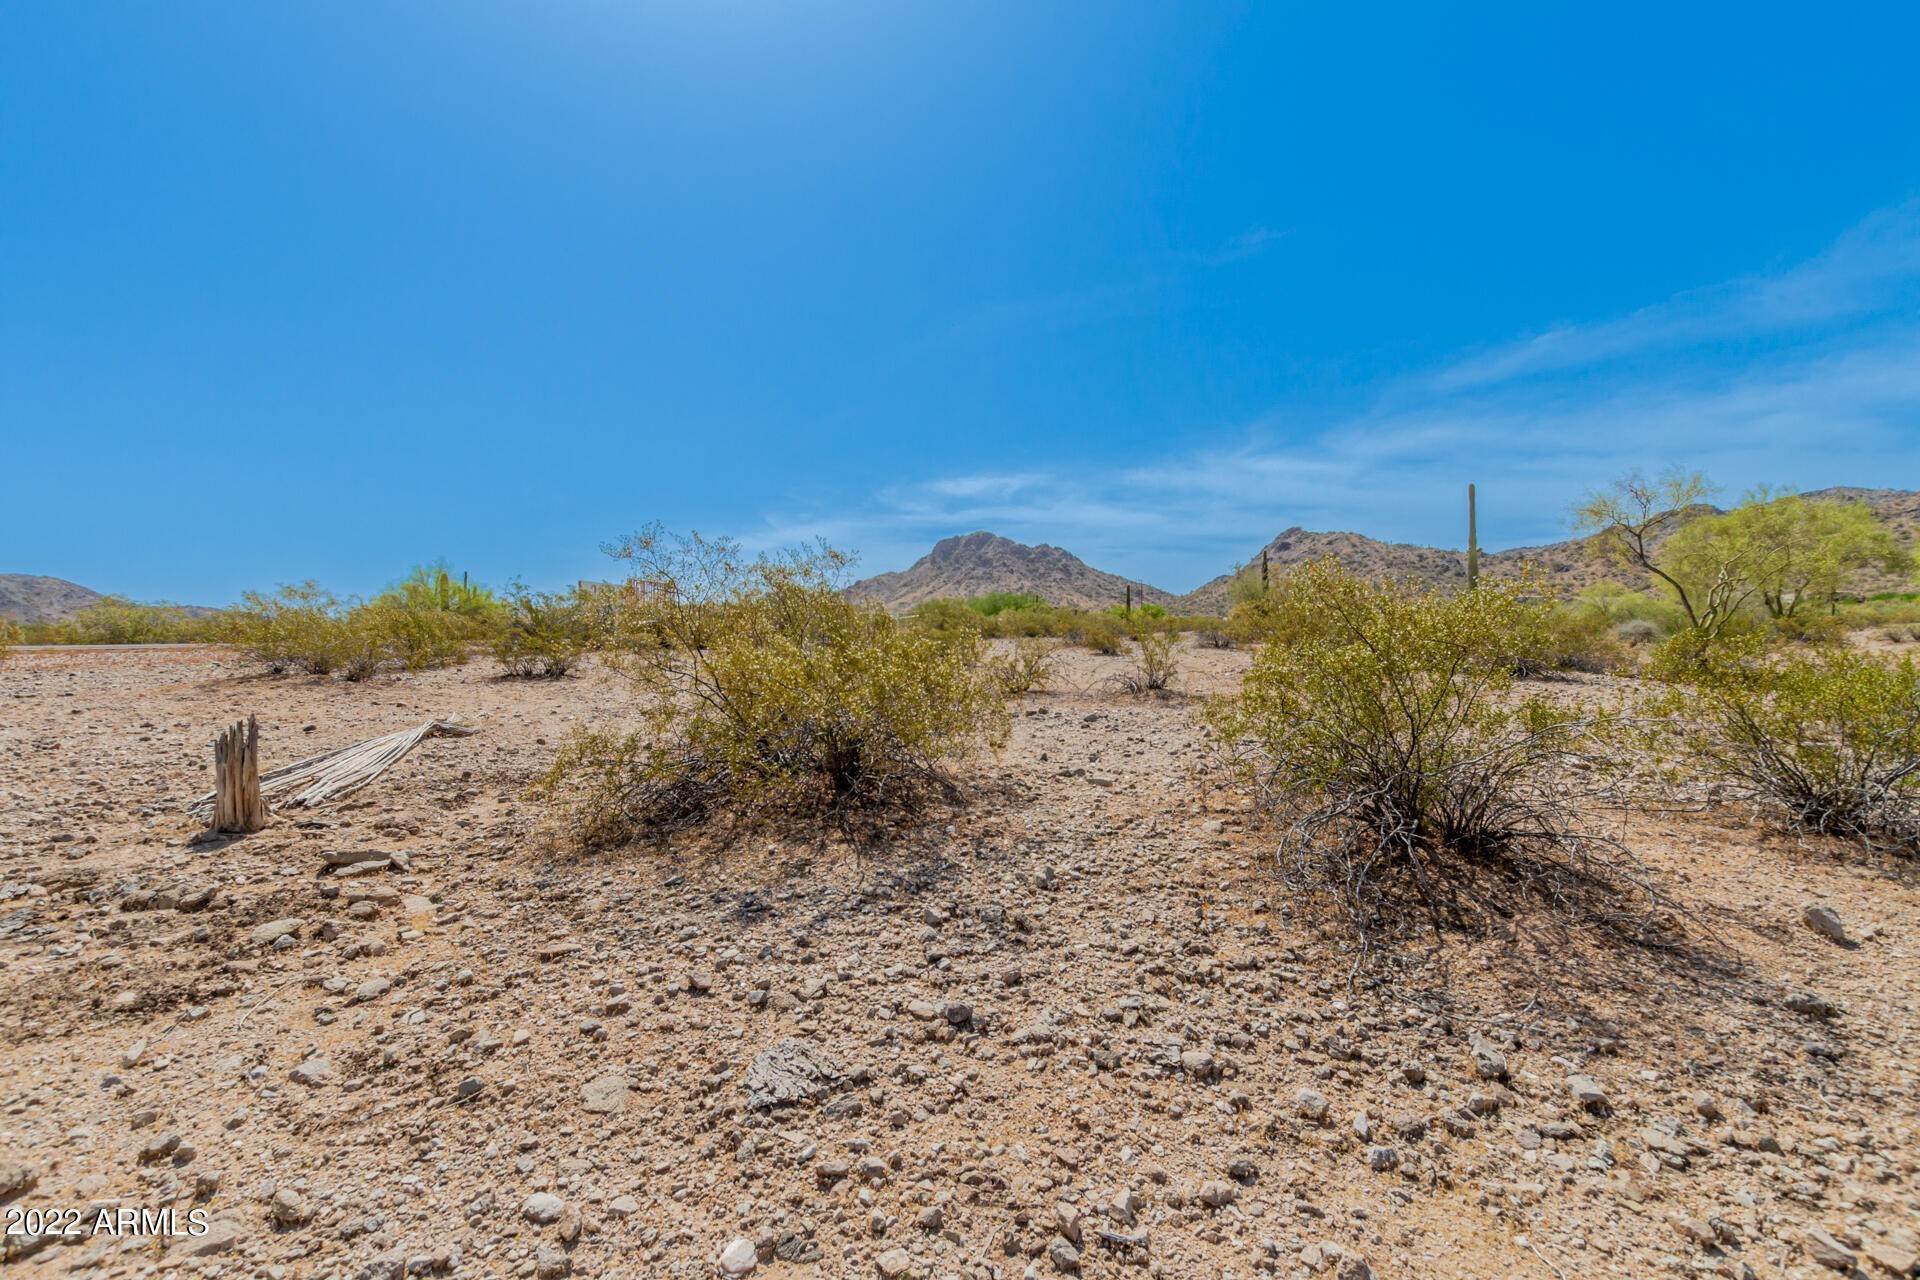 11. Land for Sale at Goodyear, AZ 85338